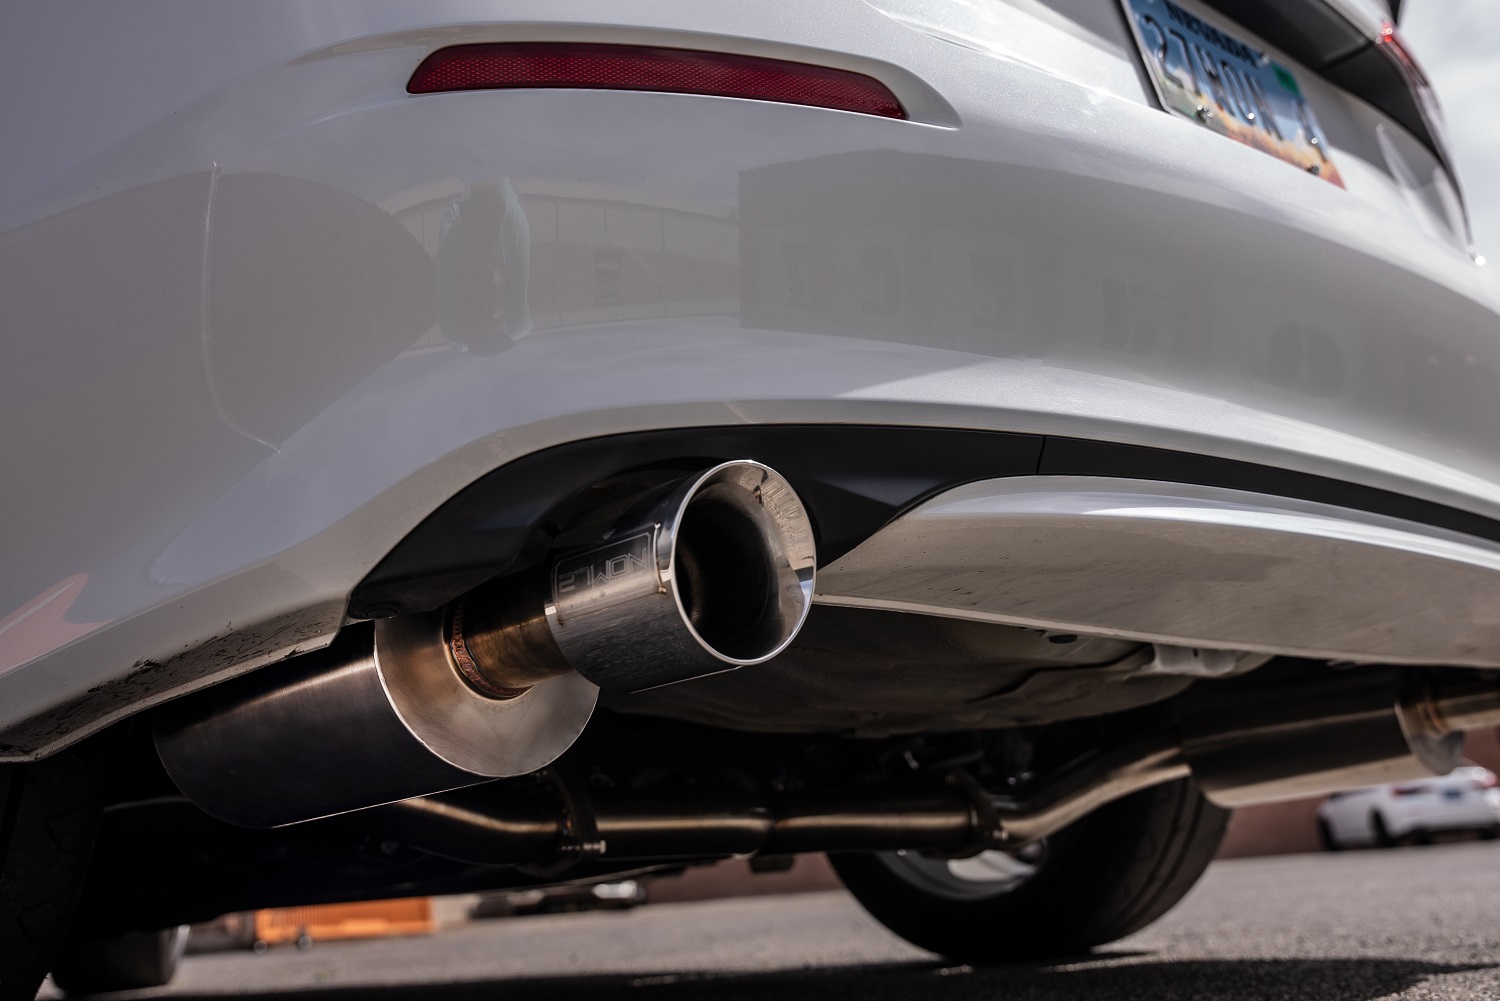 2022-civic-SI-rear-exhaust-on-car-on-a-lift